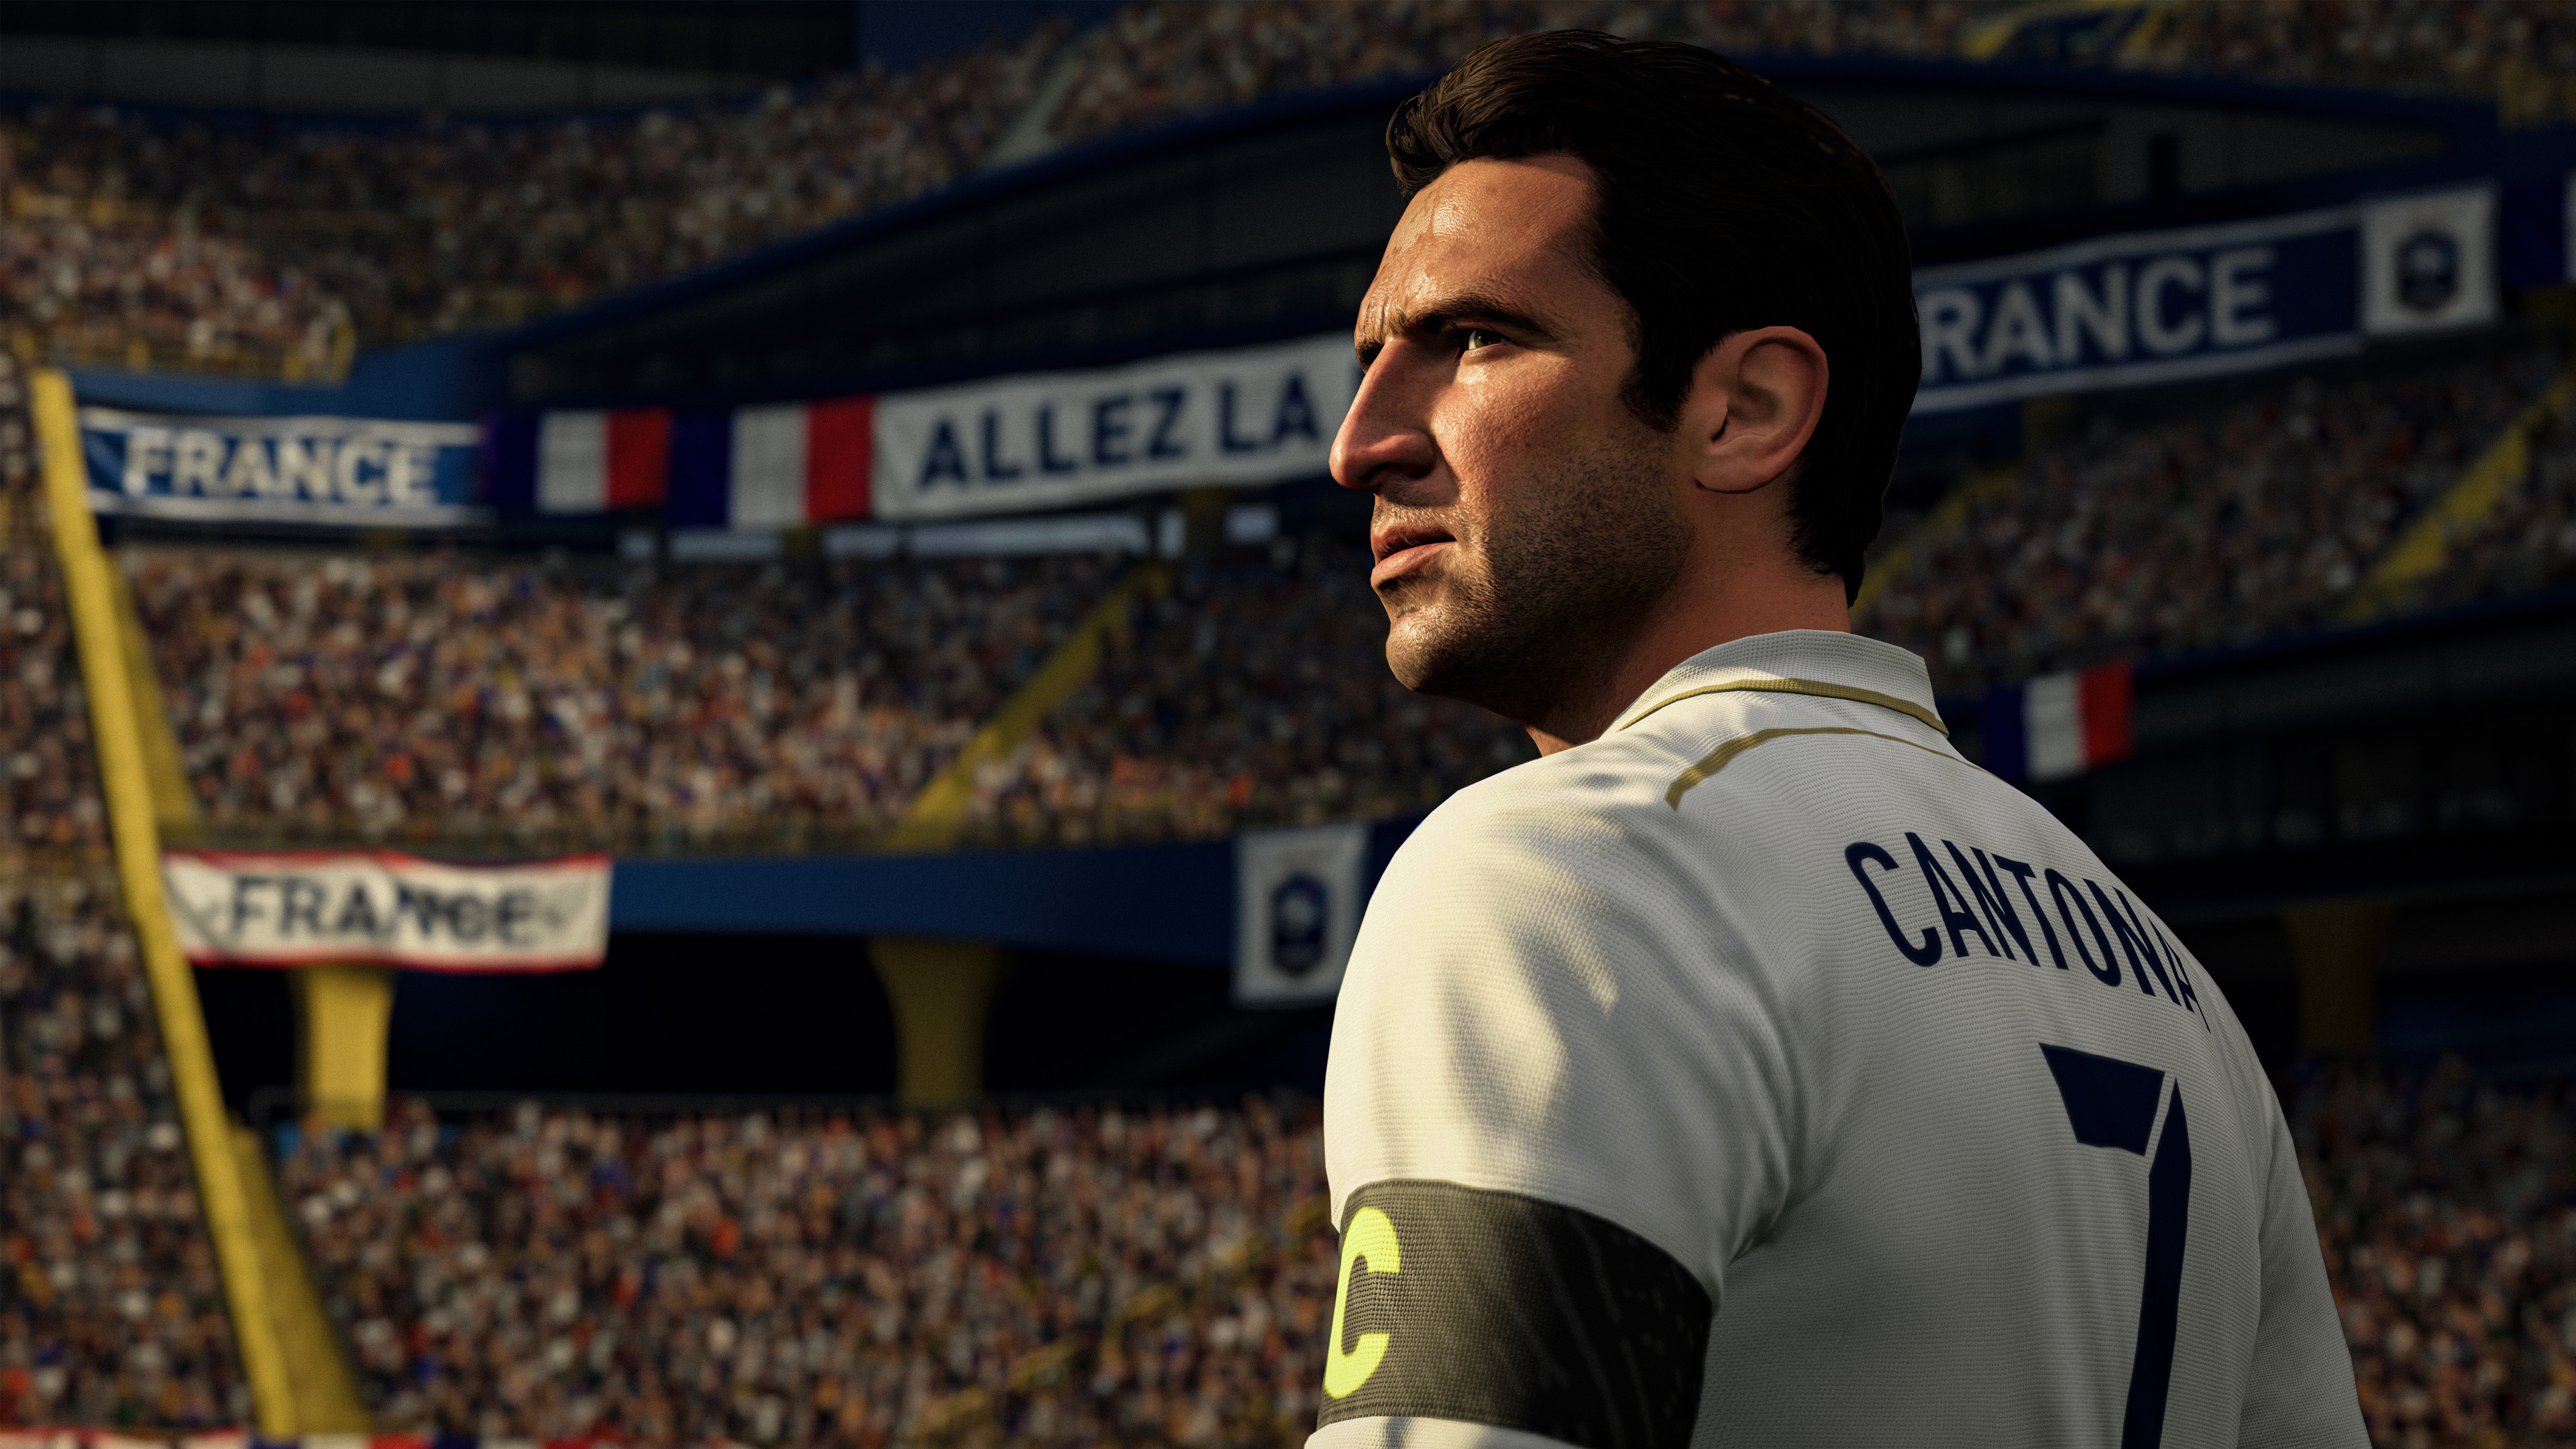 FIFA Soccer (Game): Eric Cantona, A Forward for Soccer Aid World XI FC in Rest of World. 3840x2160 4K Wallpaper.